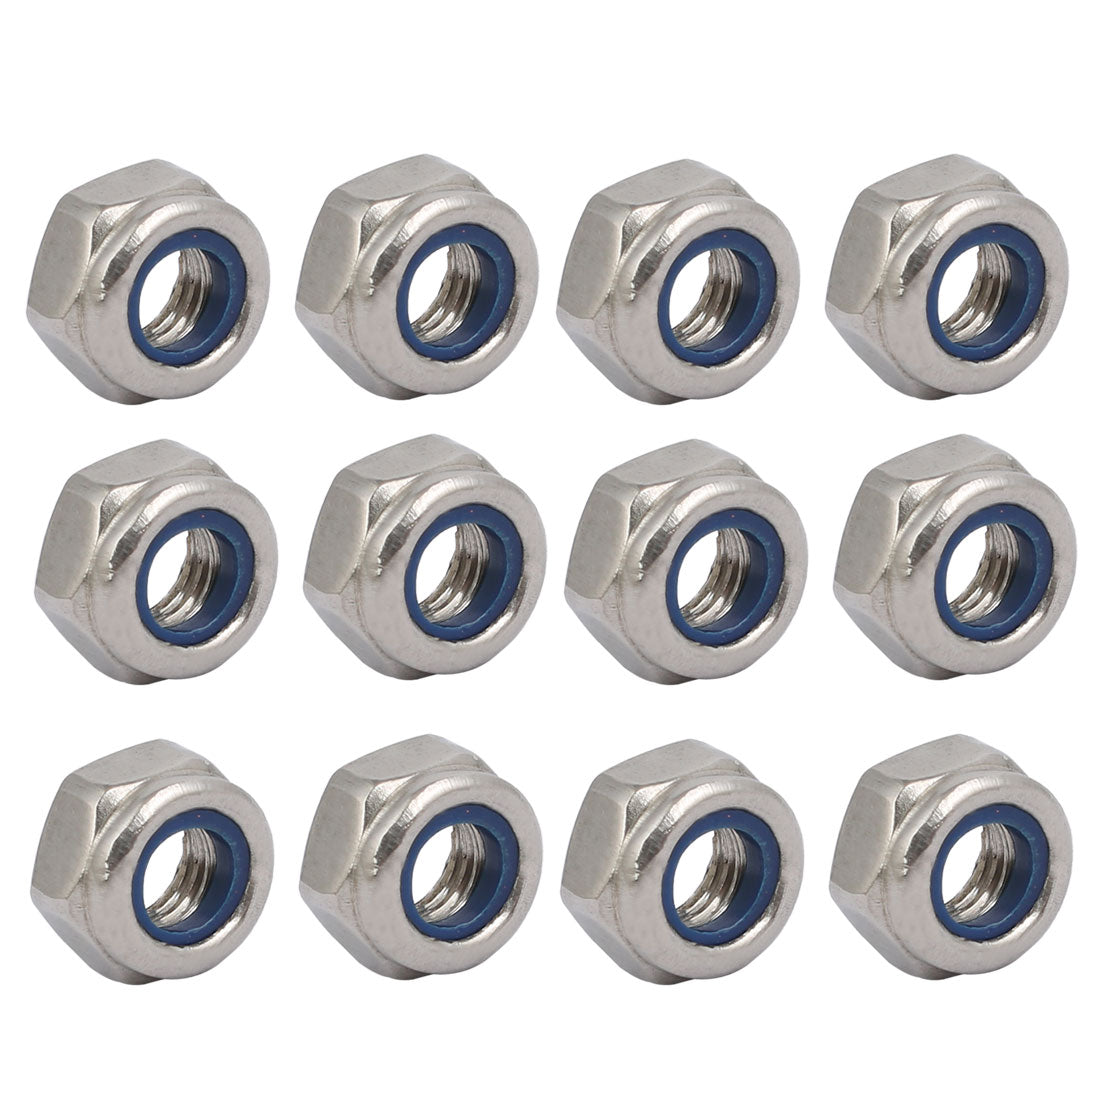 uxcell Uxcell 12pcs M6 x 1mm Pitch Metric Thread 304 Stainless Steel Left Hand Lock Nuts